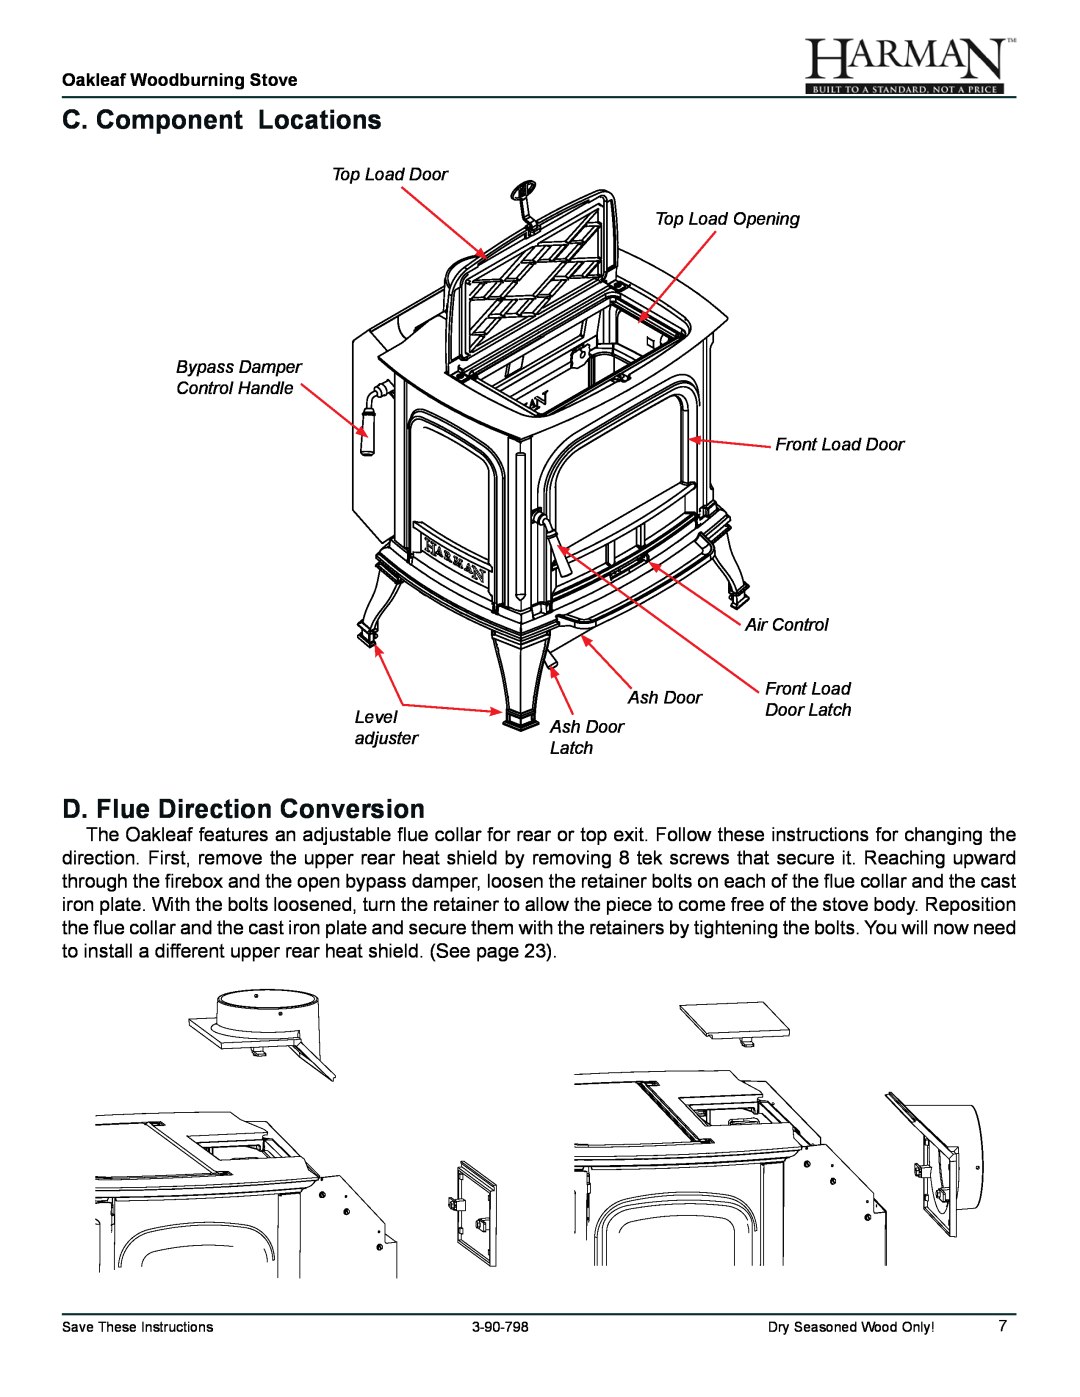 Harman Stove Company 1-90-79700 owner manual C. Component Locations, D. Flue Direction Conversion 